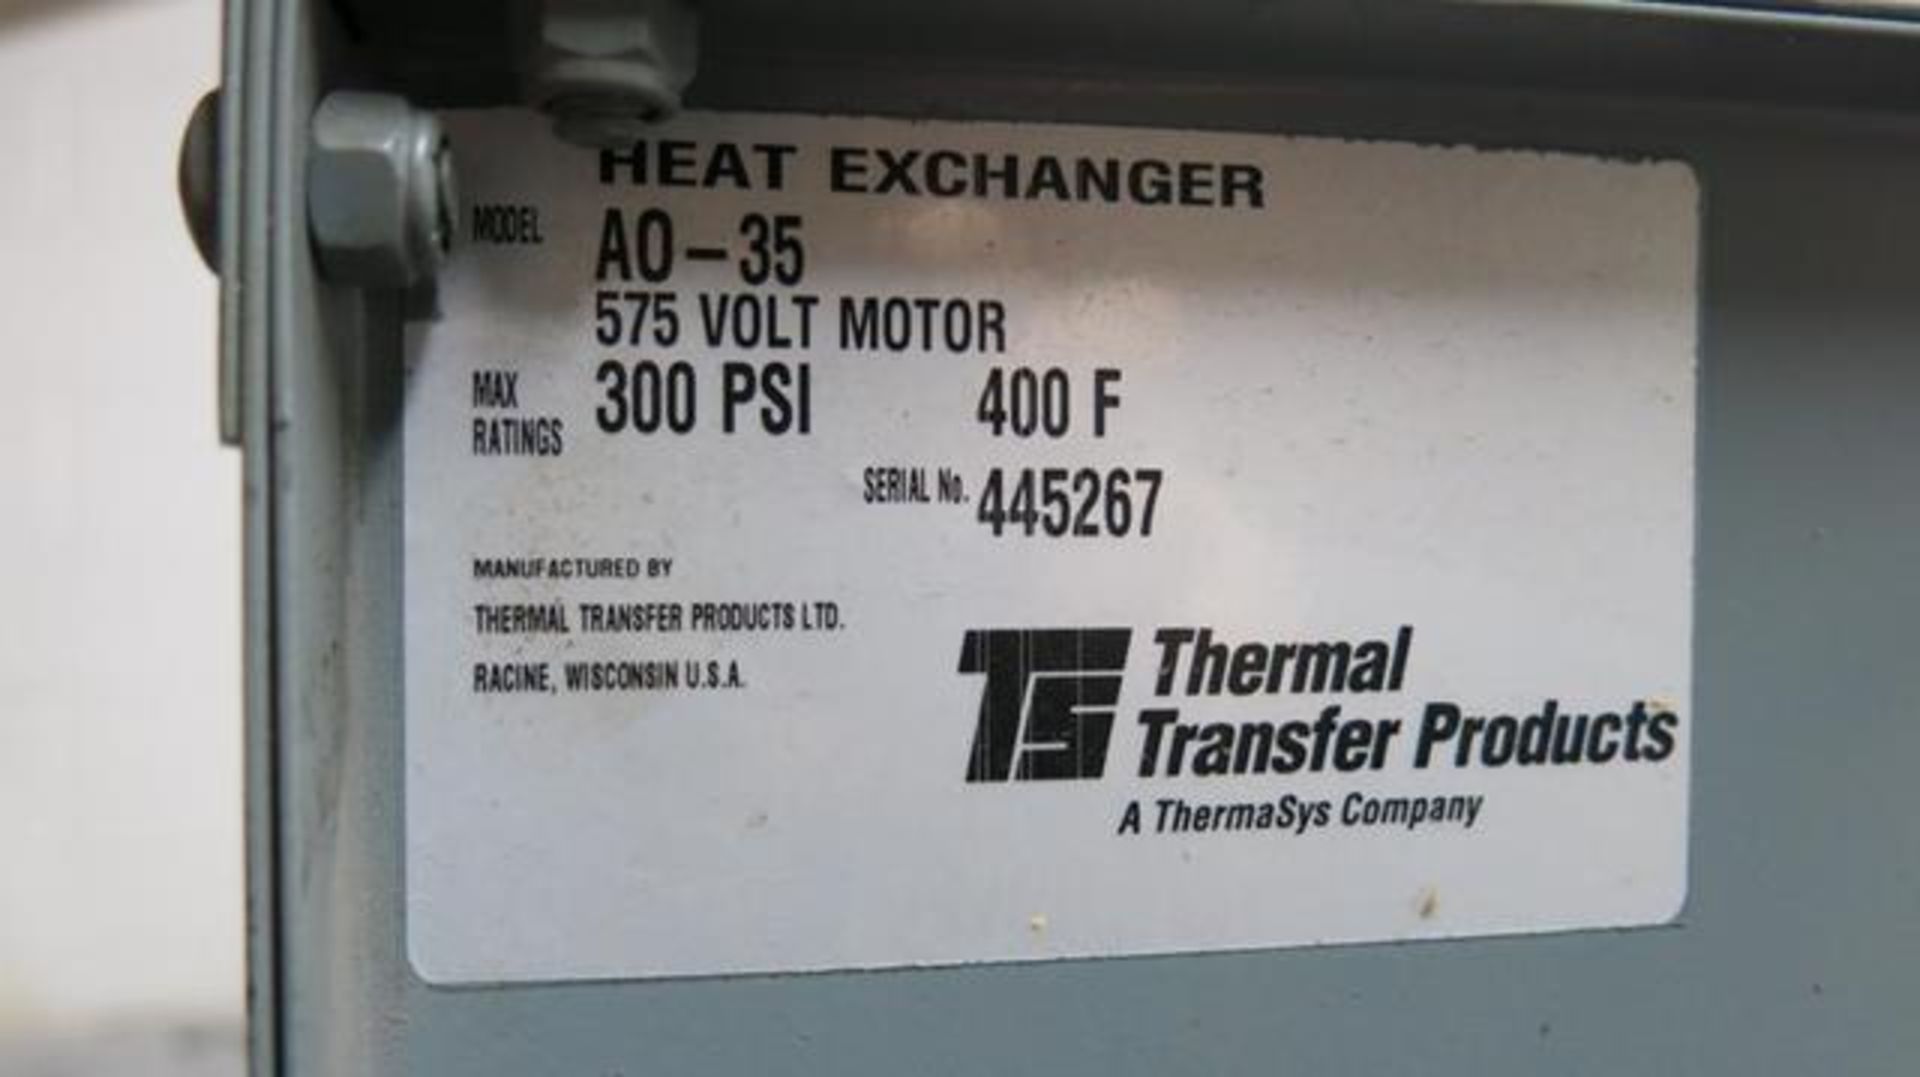 THERMAL TRANSFER PRODUCTS, A0-35, HEAT EXCHANGER, 575 VAC, 300 PSI WITH (2) BROOK, 30 HP, MOTORS AND - Image 3 of 9